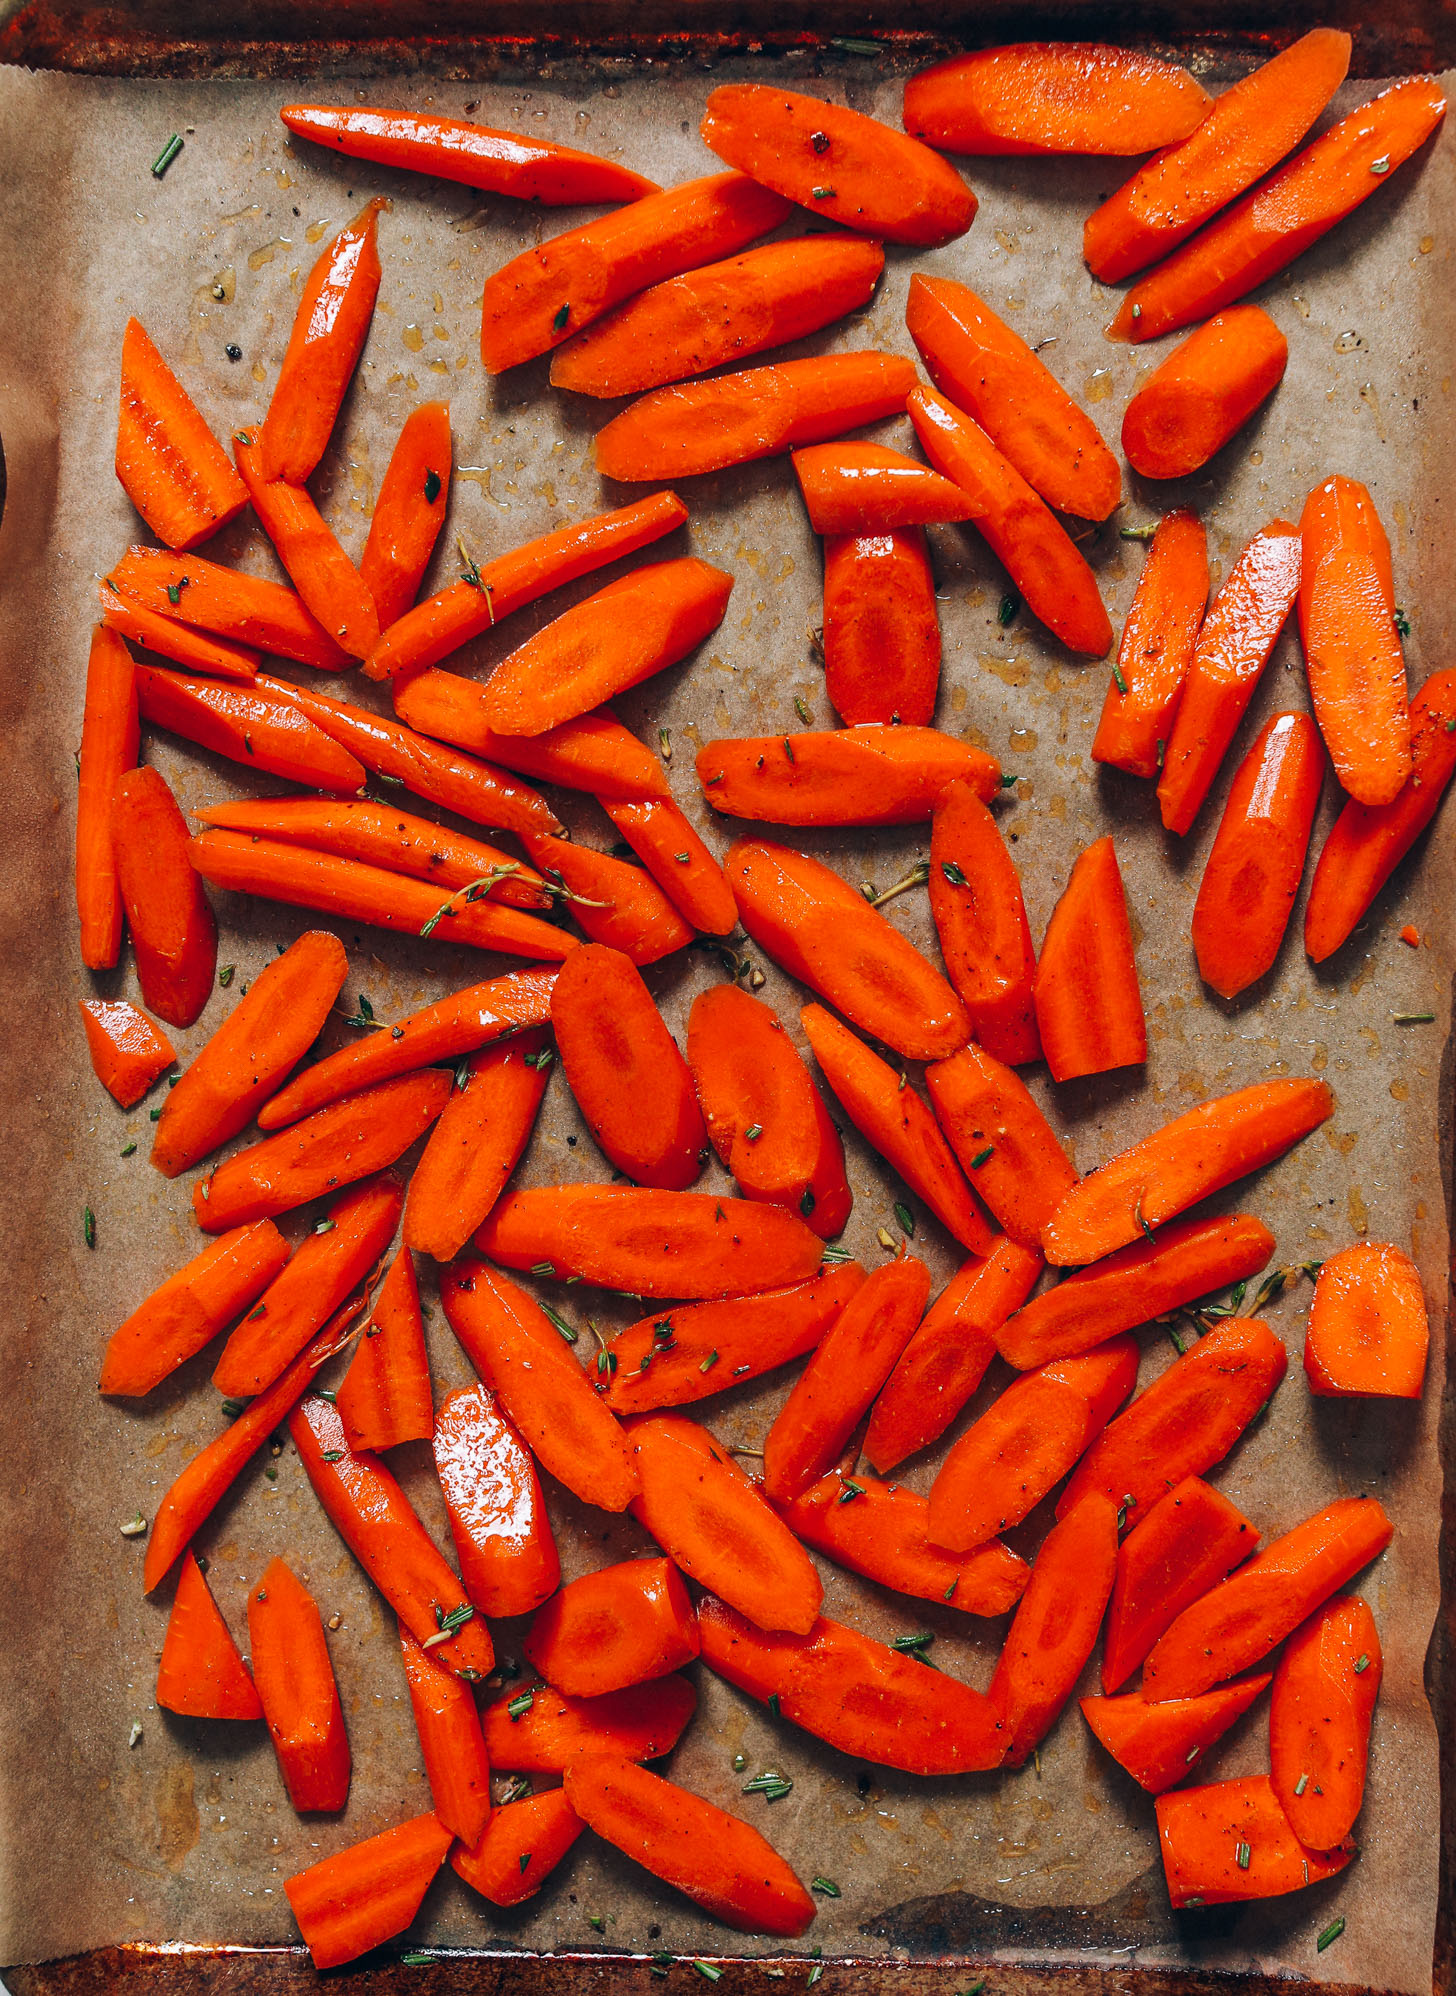 Sliced carrots on a baking sheet with fresh thyme